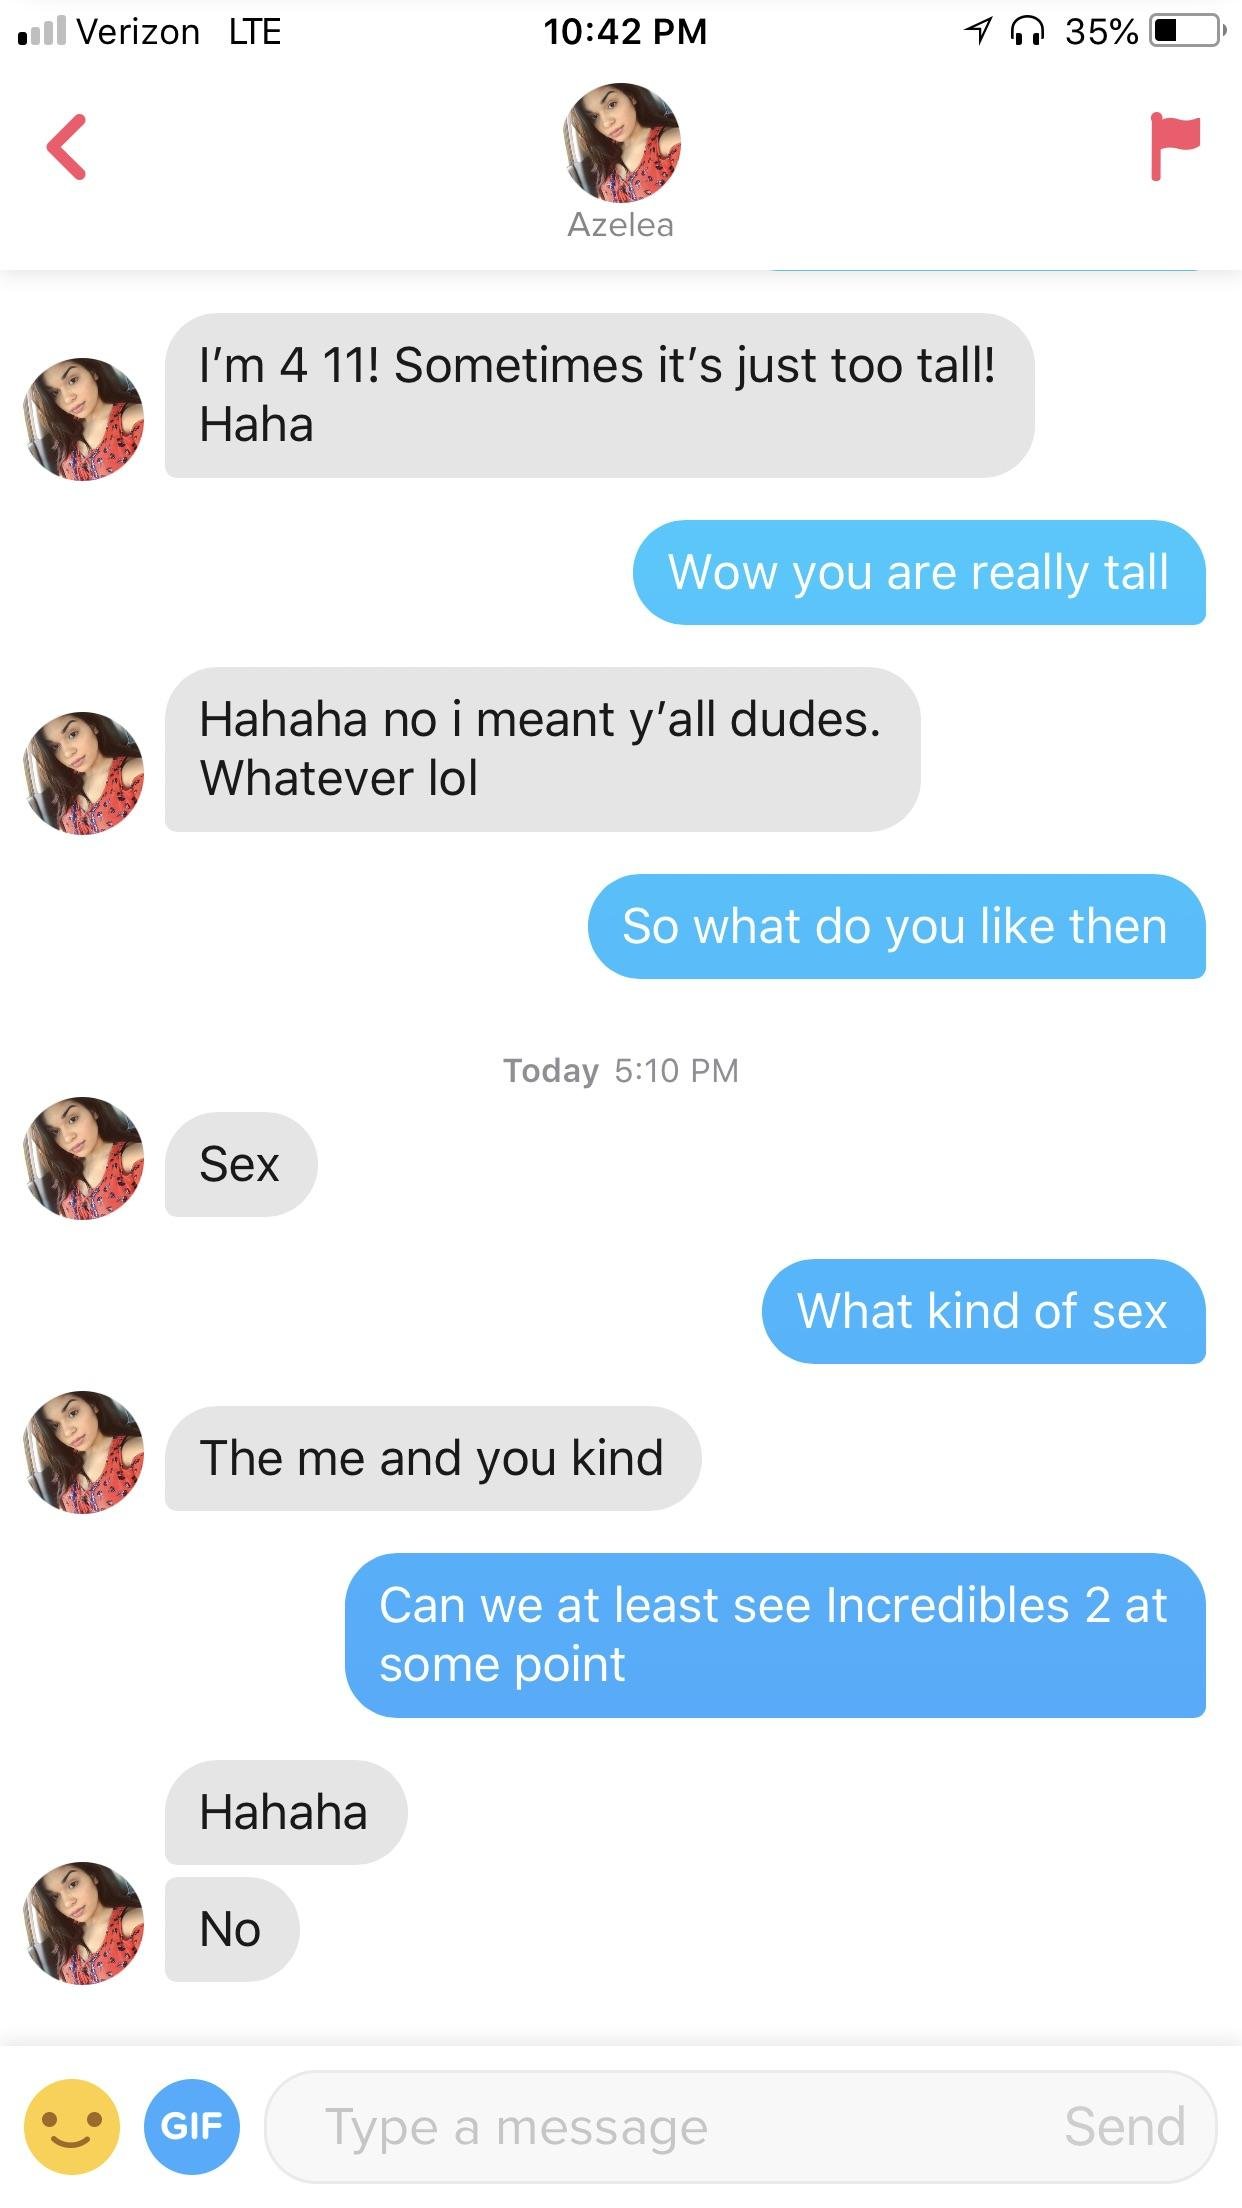 28 Shameless Things Spotted on Tinder